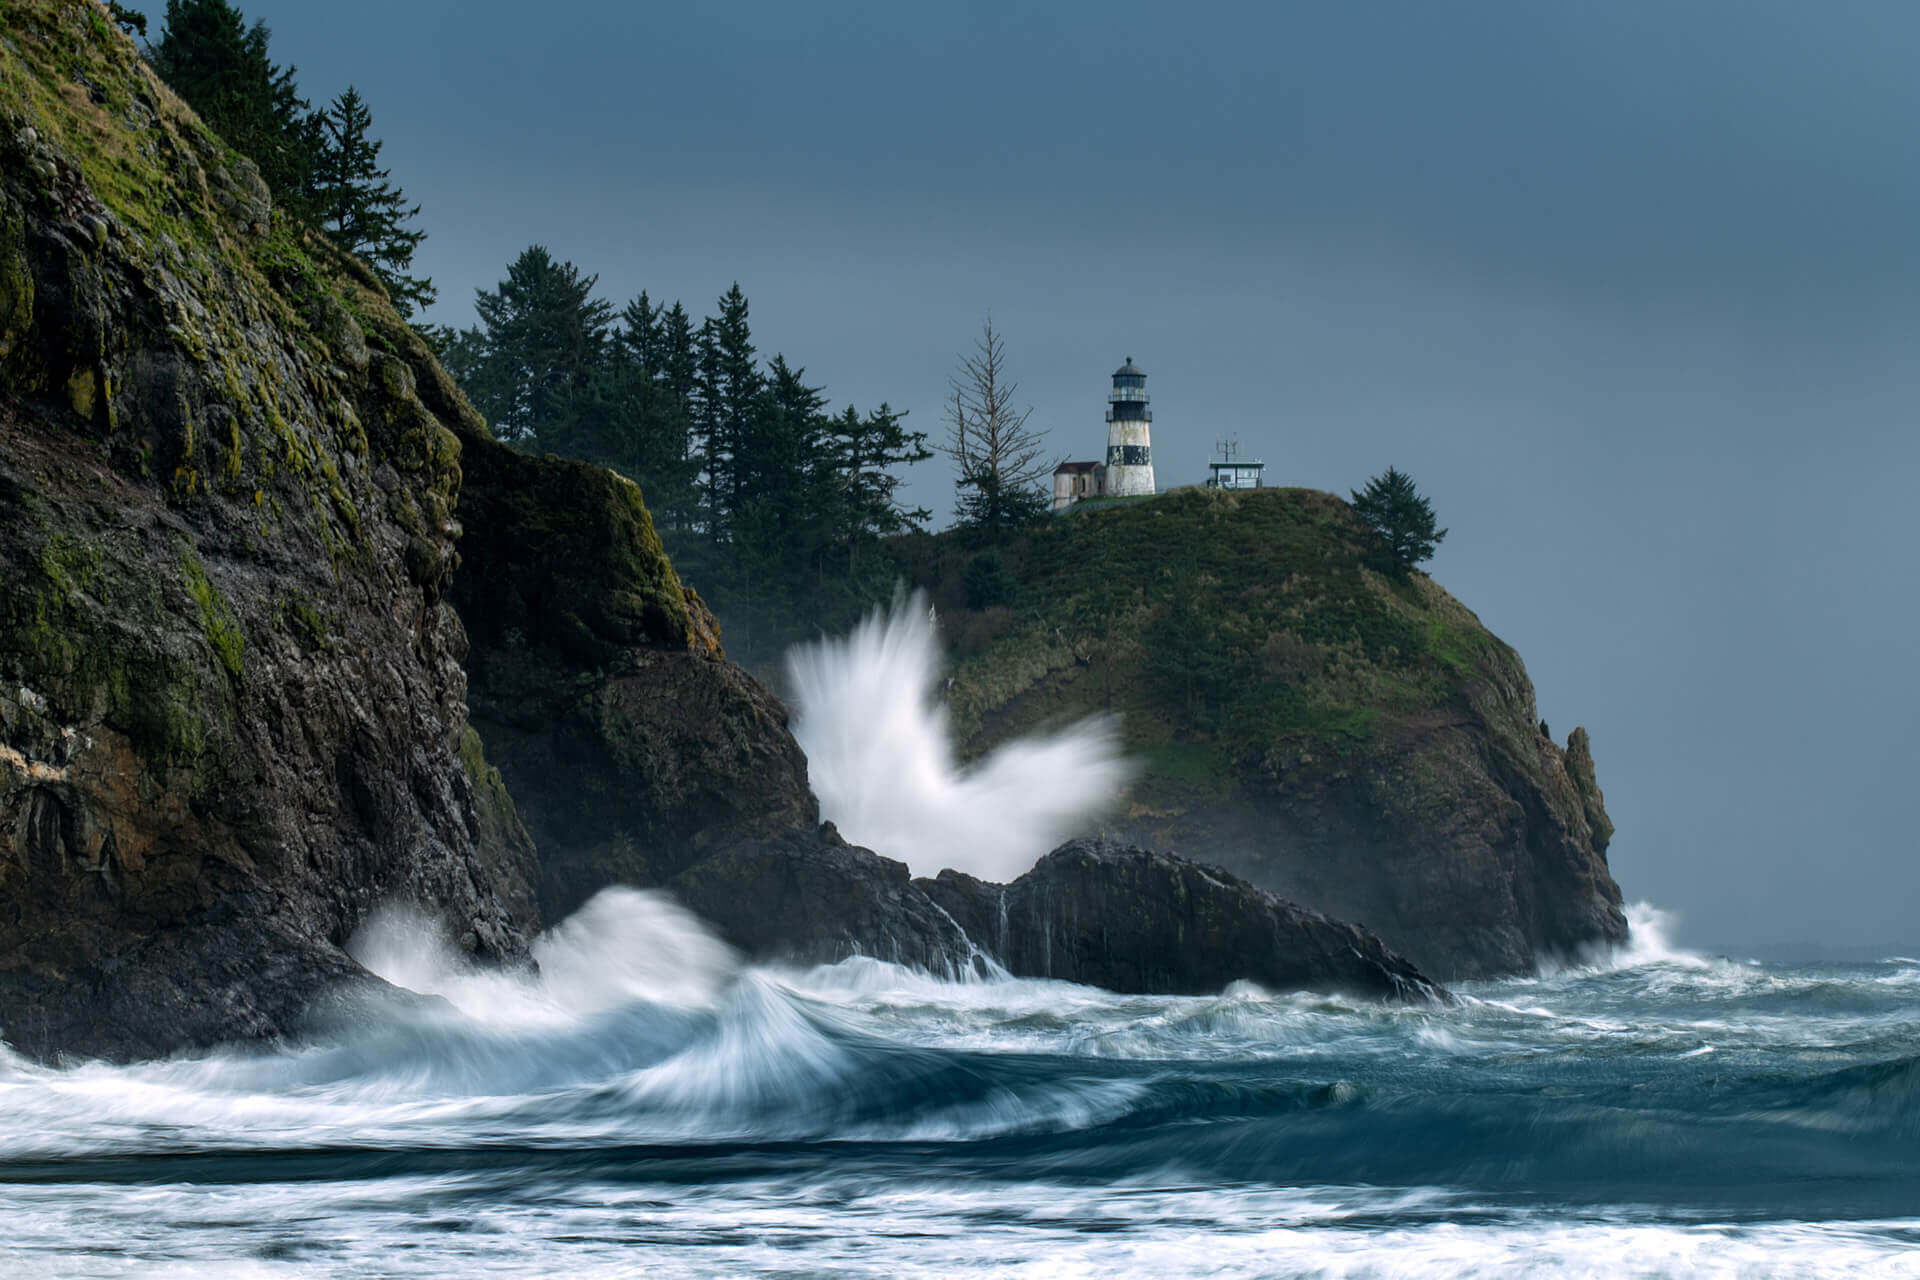 Cape Disappointment Lighthouse stands on a rocky cliff as waves crash against the rocks.